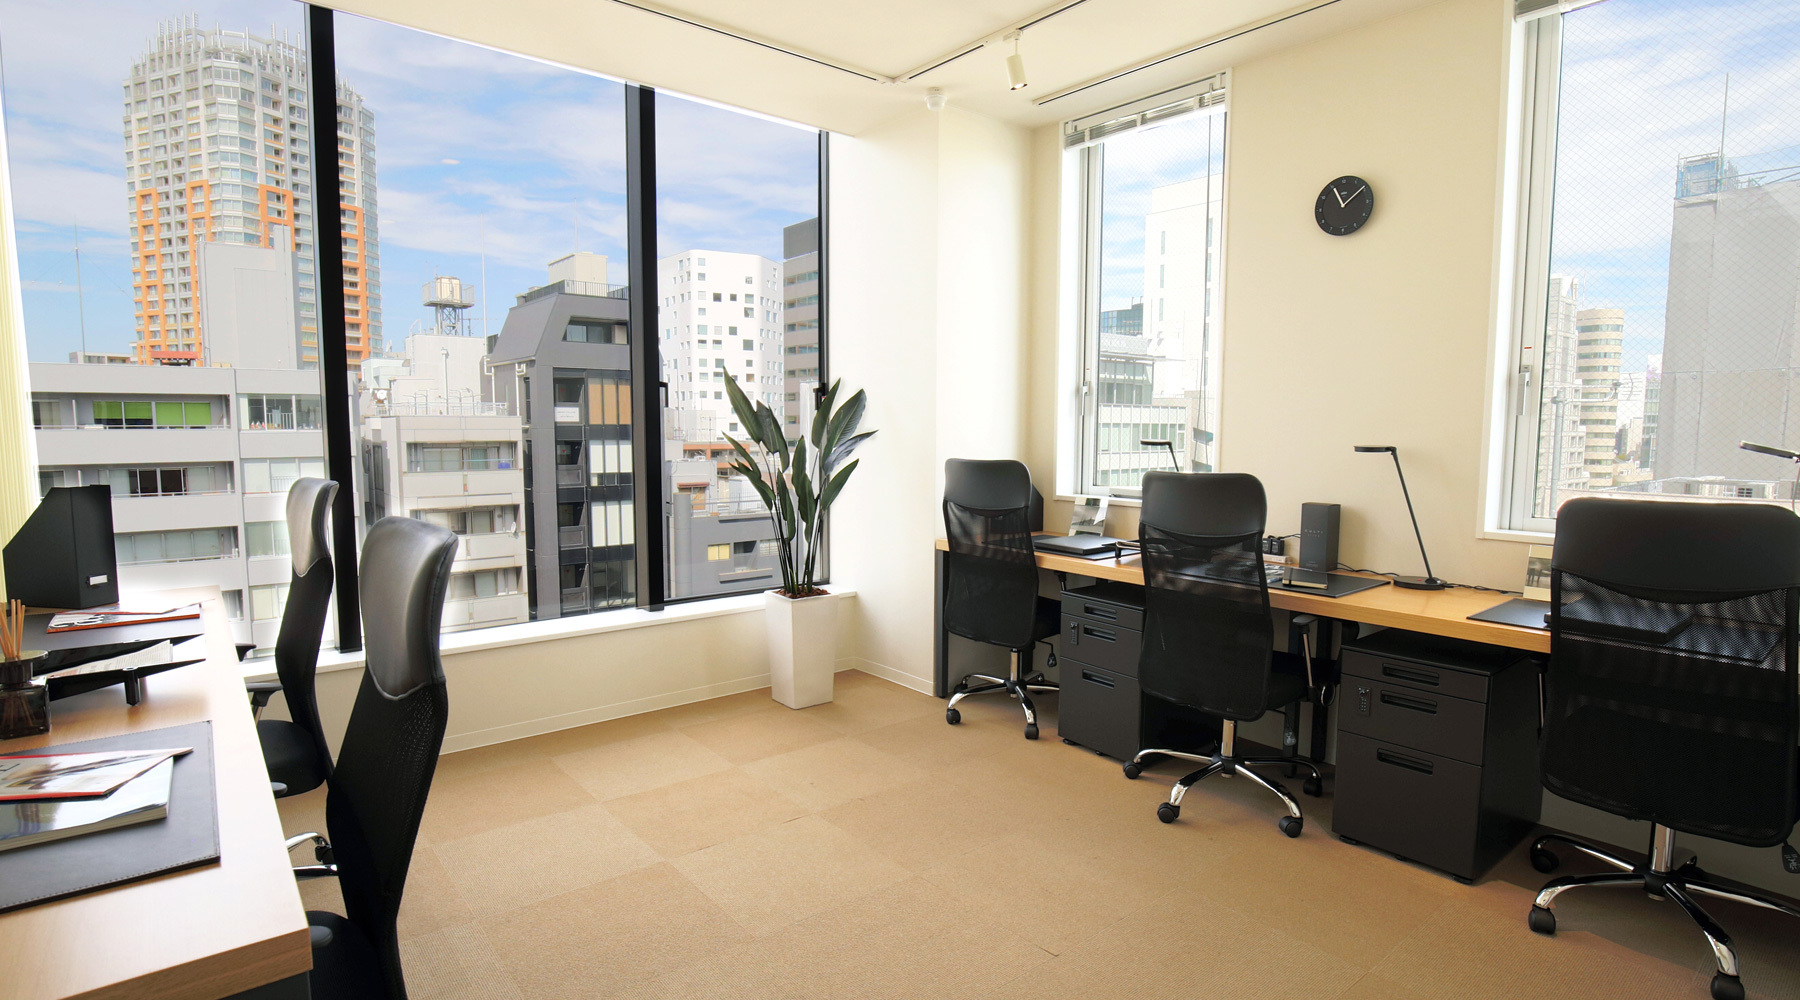 Private office with furnished office space.